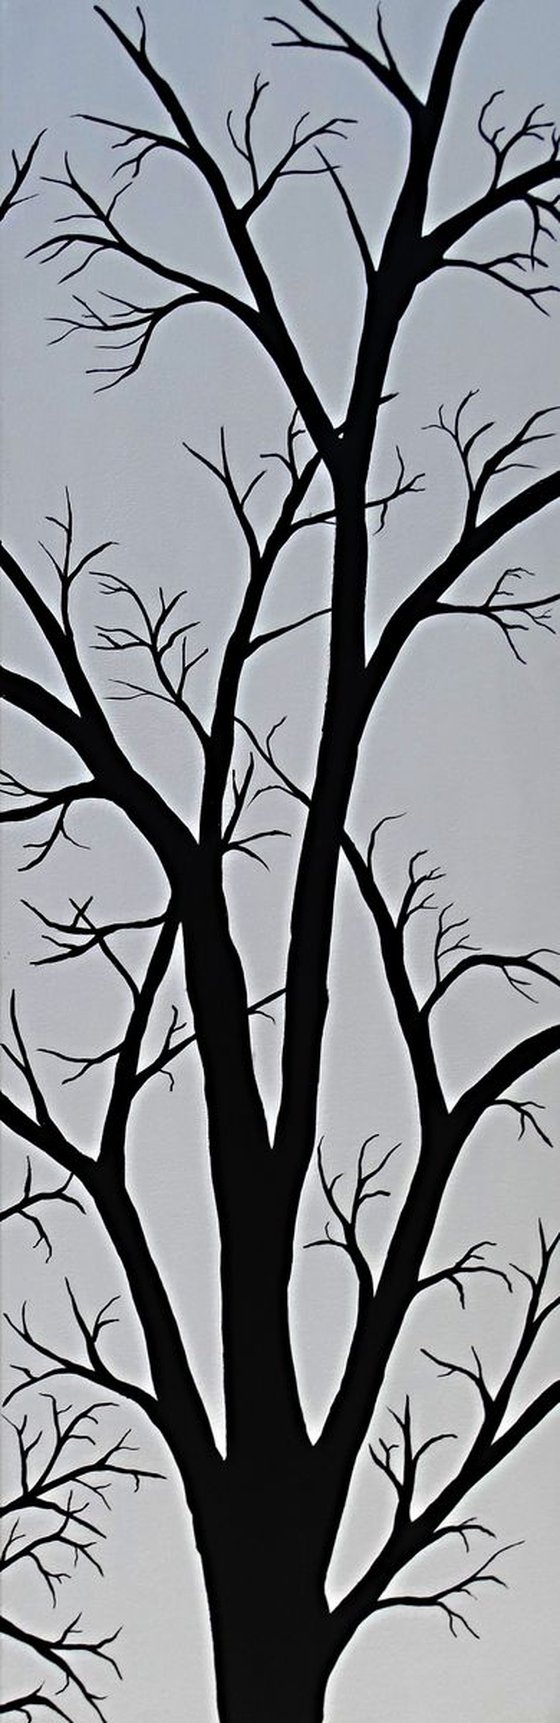 Tree silhouettes triptych